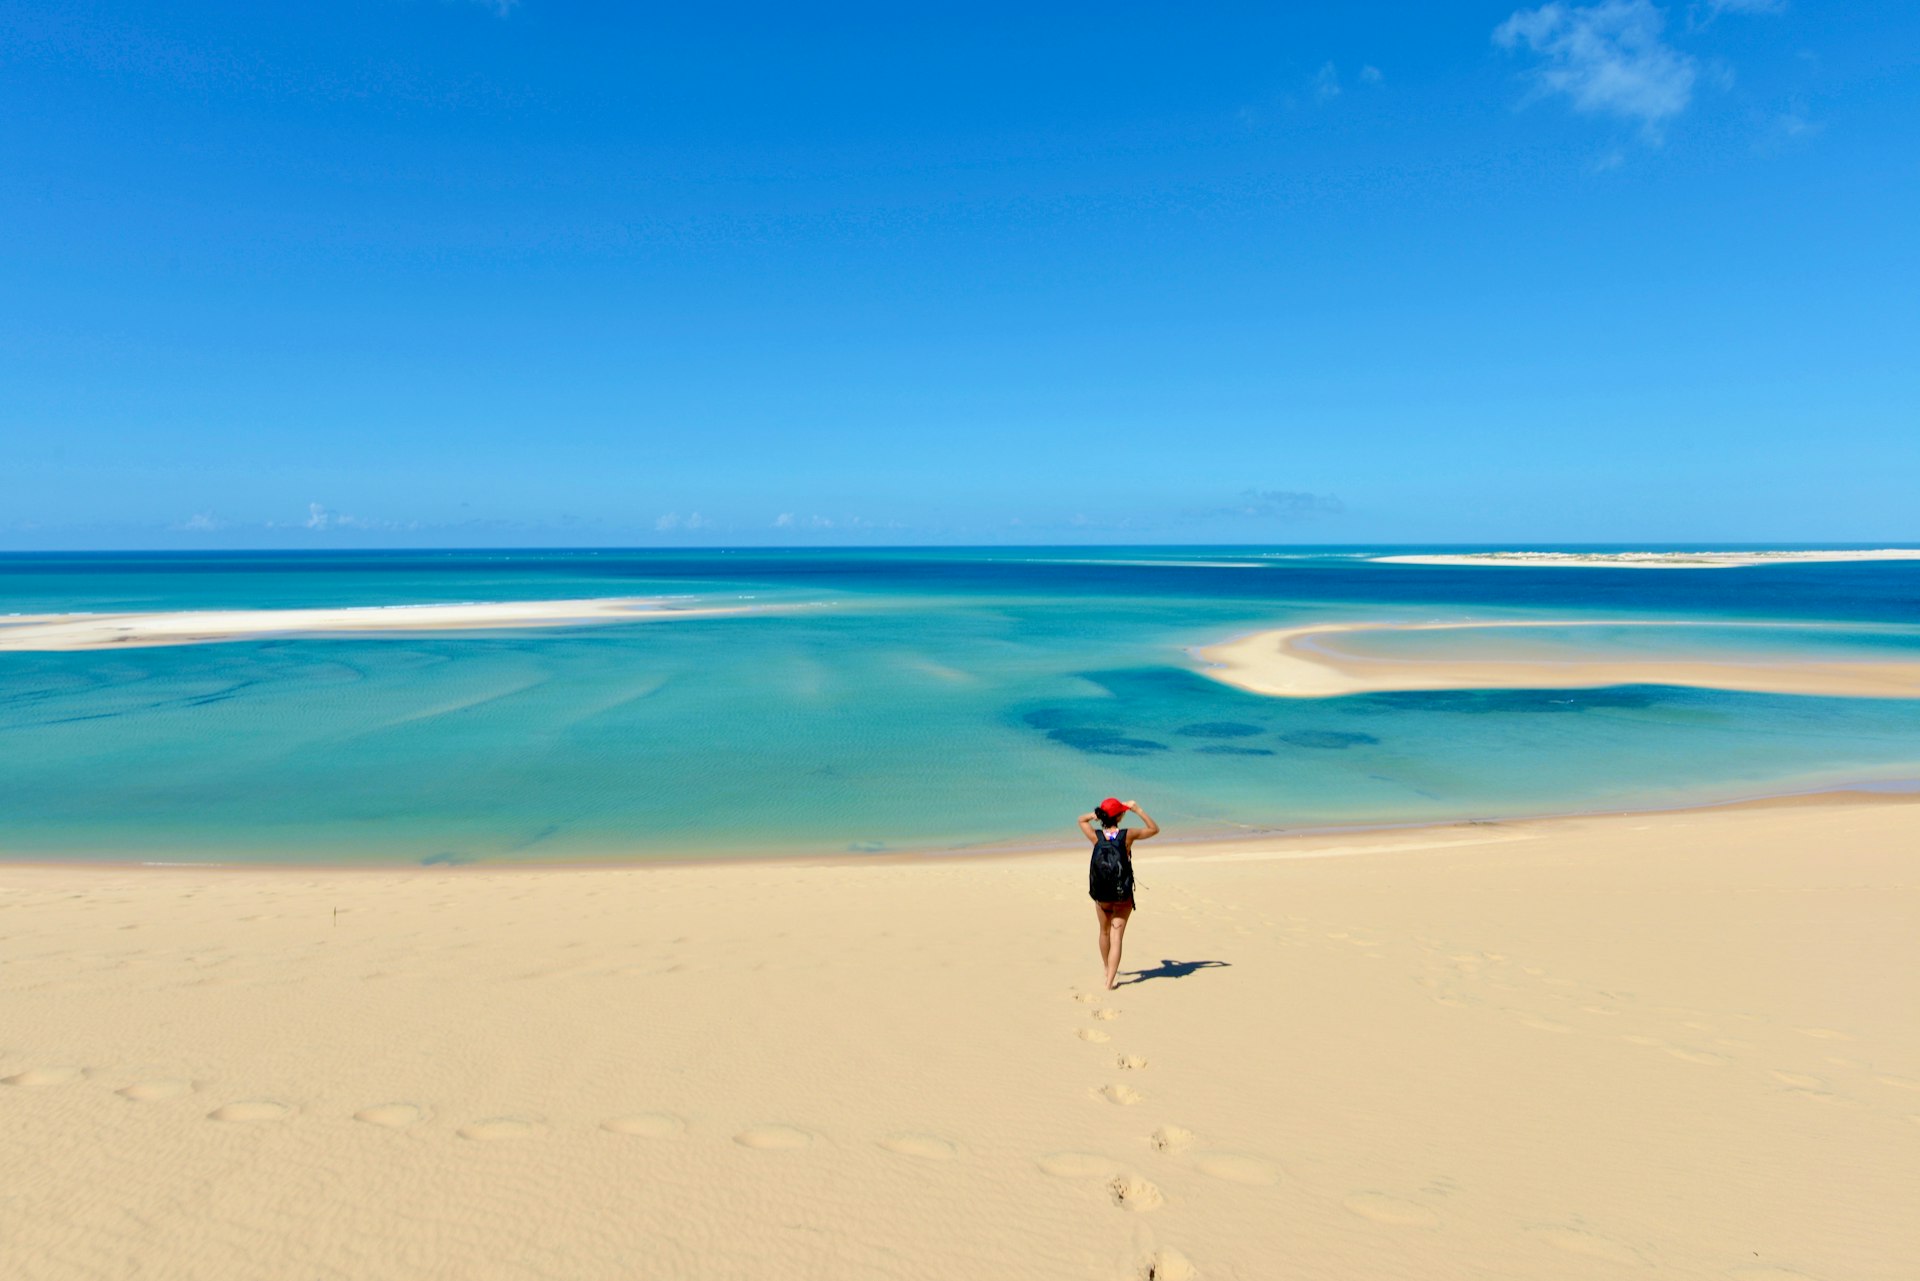 A lone traveler standing on a vast sandy beach, observing the tranquil blue-green waters merging with the sky at the horizon, with footprints trailing behind in the sand.